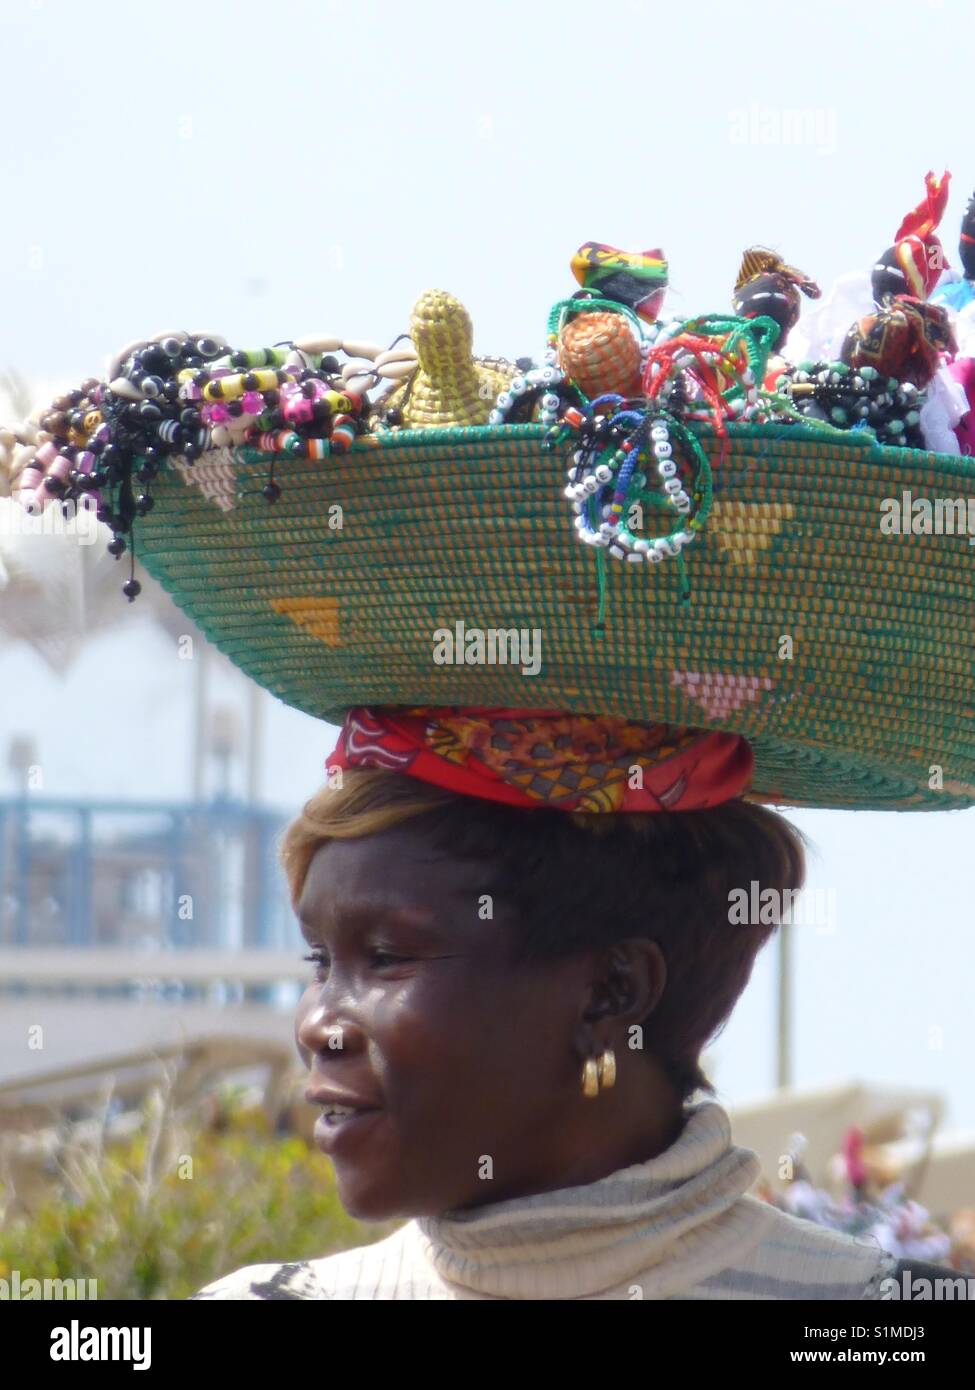 A Beautiful Souvenir Seller Carrying Her For Sale Items On Her Head In Cape Verde...x Stock Photo